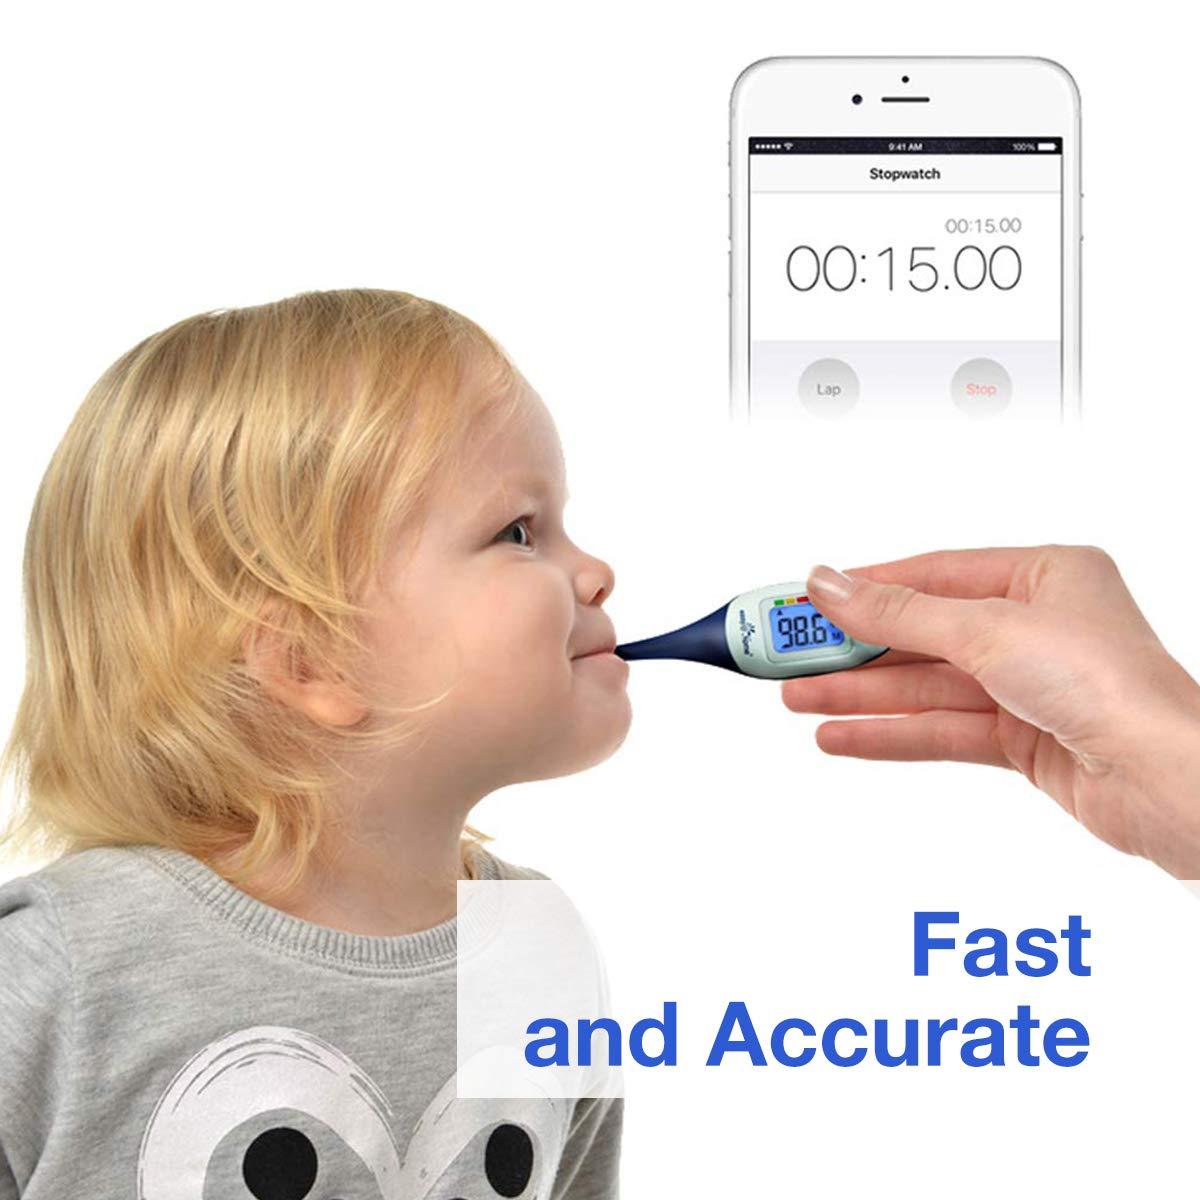 Digital Medical Baby Fever Oral Thermometer, Rectal or Axillary Underarm Body Temperature Measurement with Backlit LCD Display, Waterproof Flexible